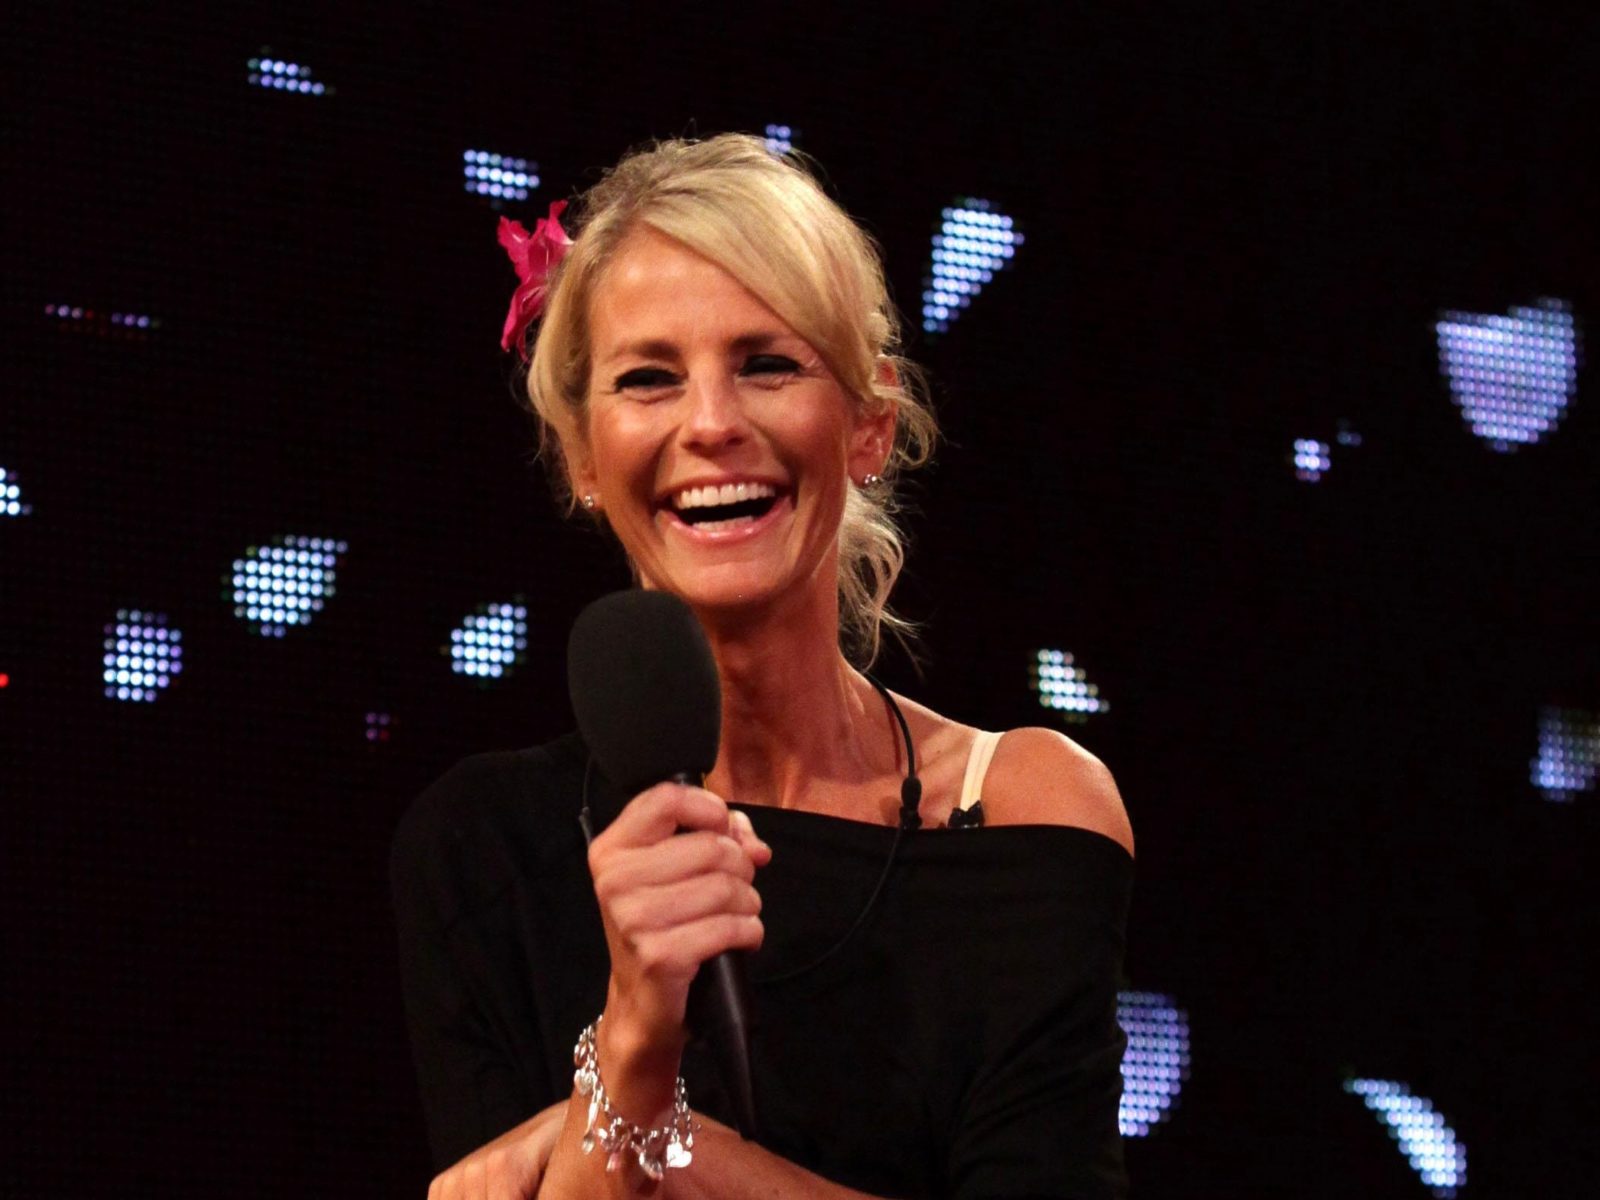 Ulrika Jonsson Age: A Life in the Spotlight